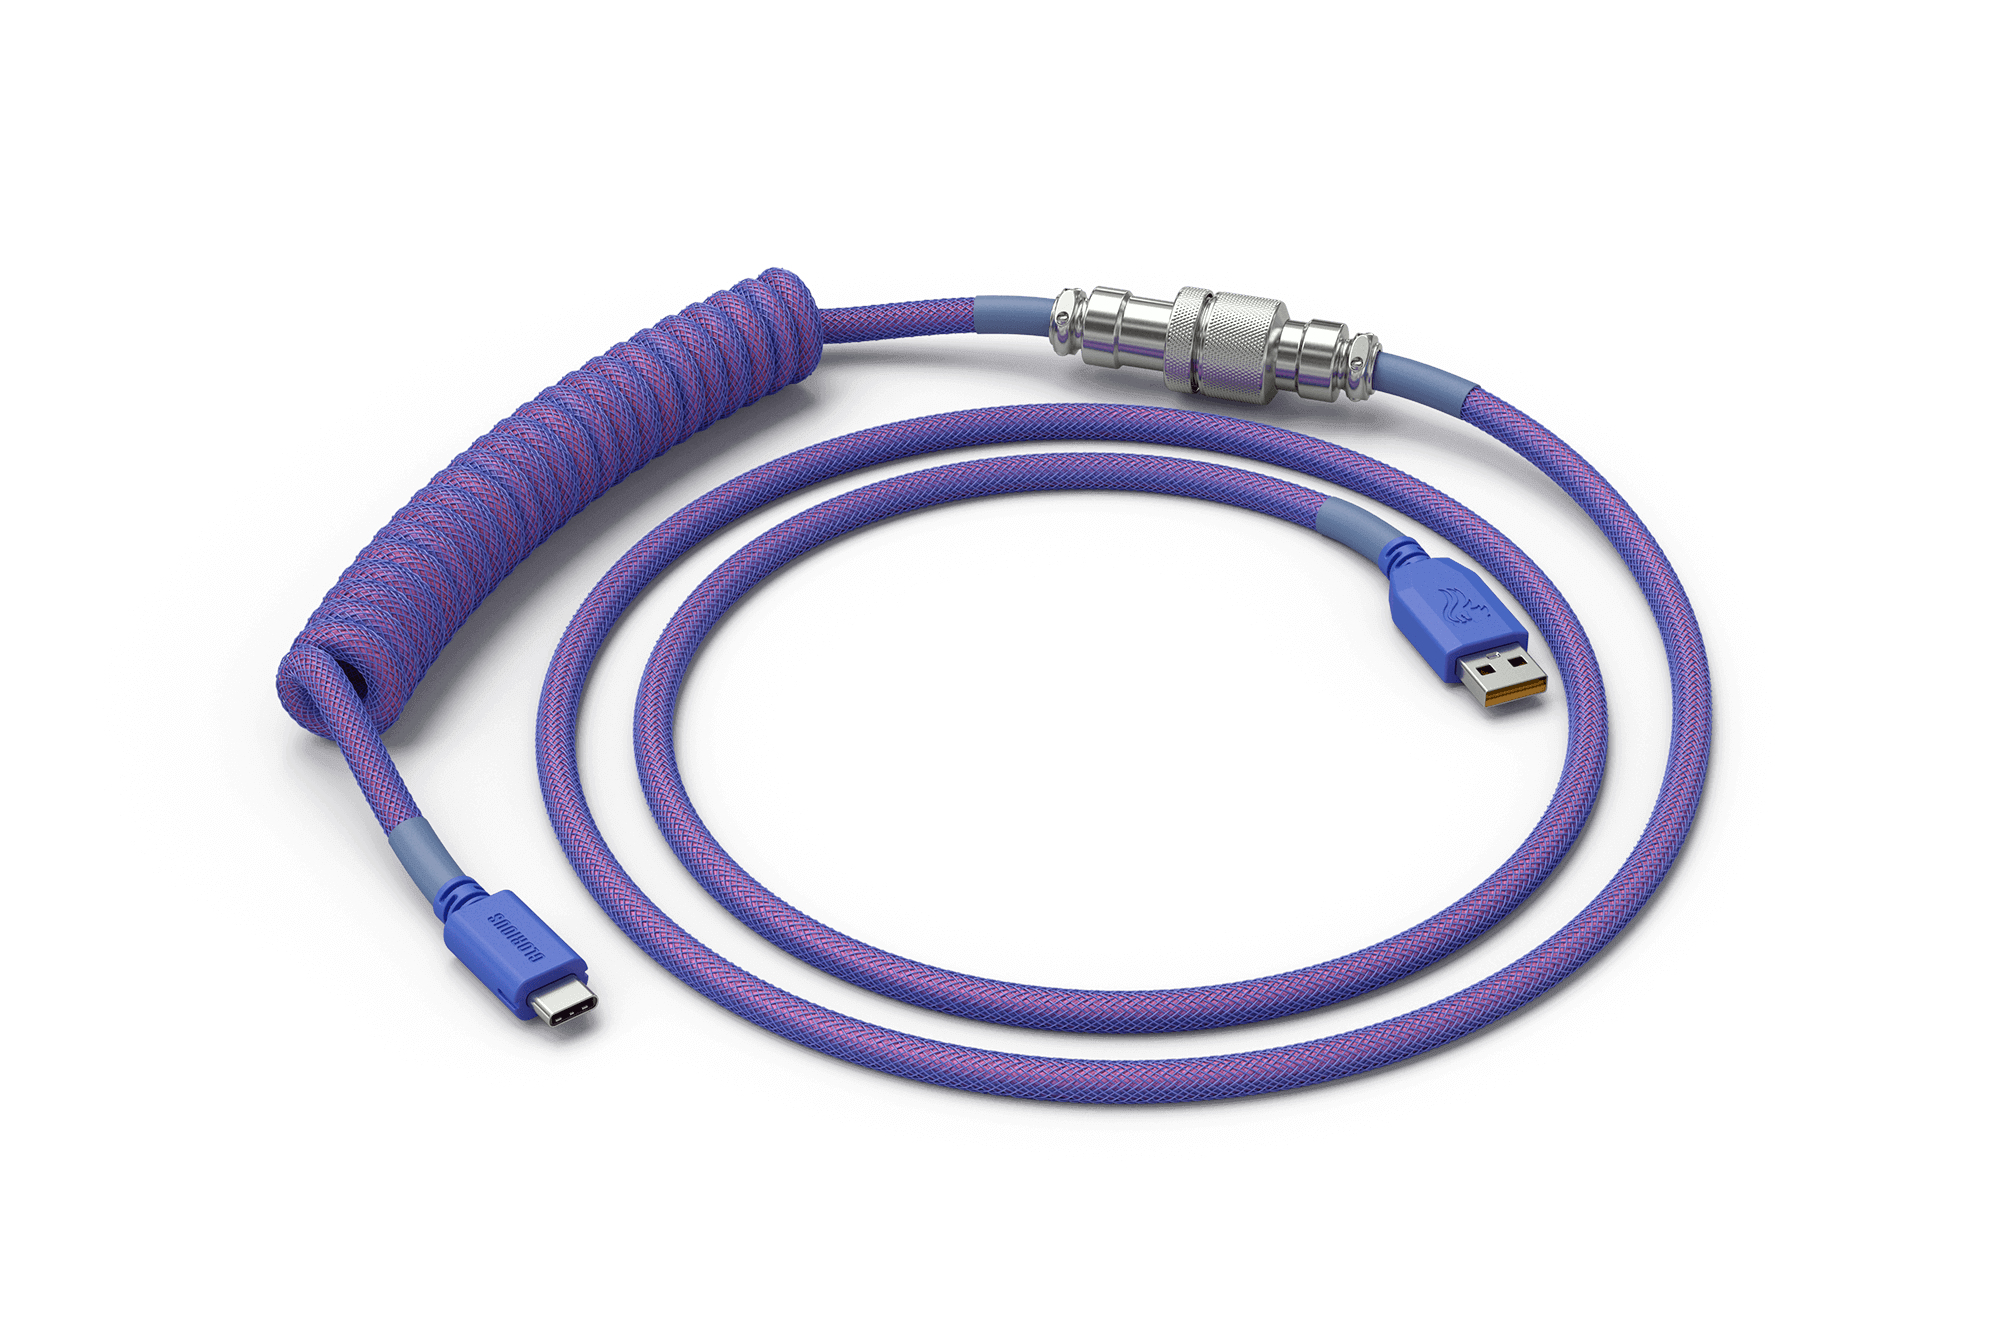 GLO-CBL-COIL-NEBULA GLORIOUS PC GAMING RACE Coiled Cable USB-C to USB-A - Purple (GLO-CBL-COIL-NEBULA)